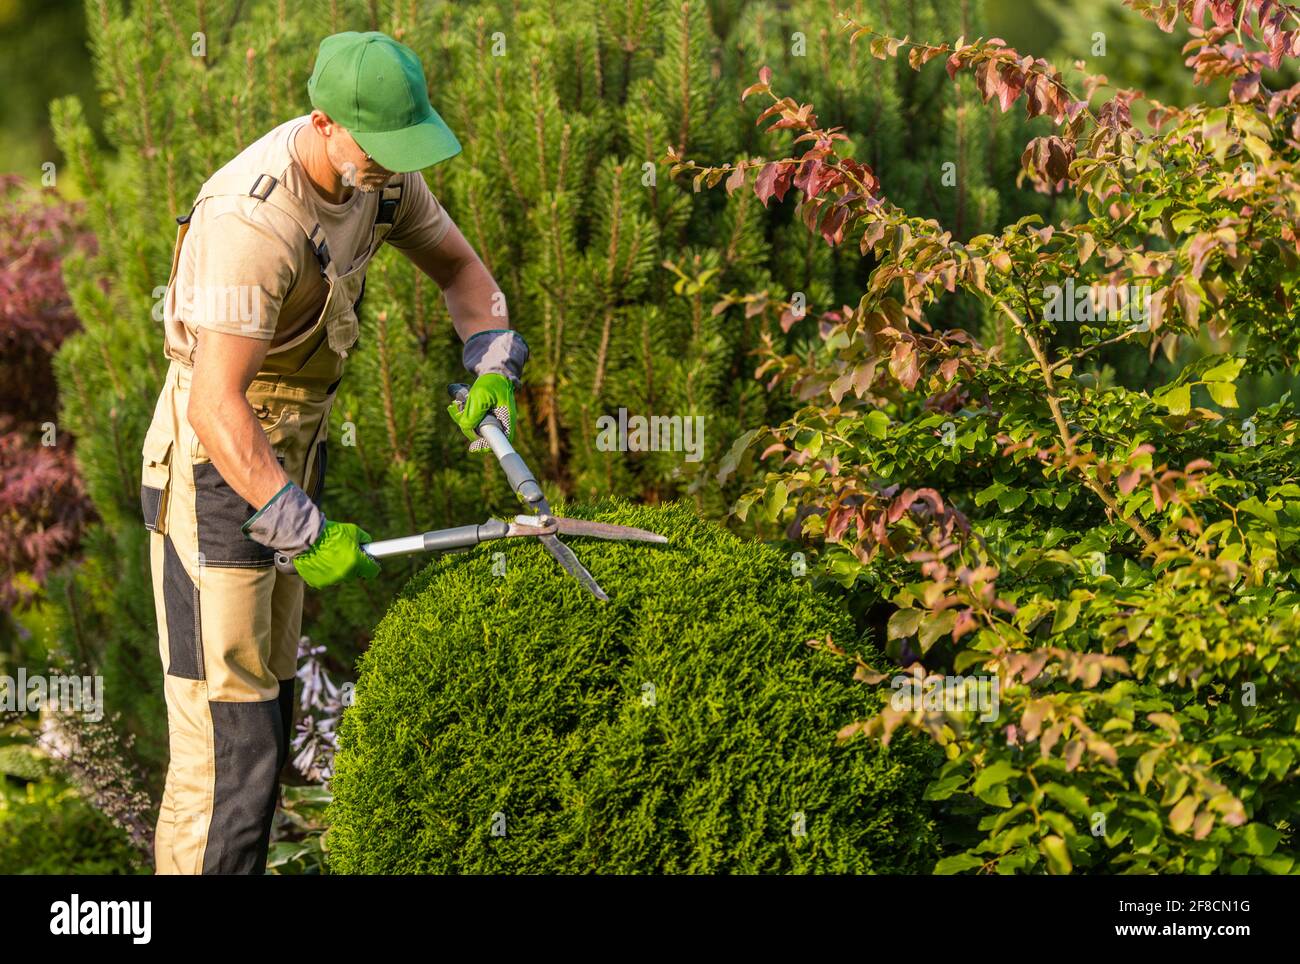 Caucasian Gardener in His 40s Trimming Garden Plants. Decorative Trees Topiary. Gardening and Landscaping Services. Stock Photo